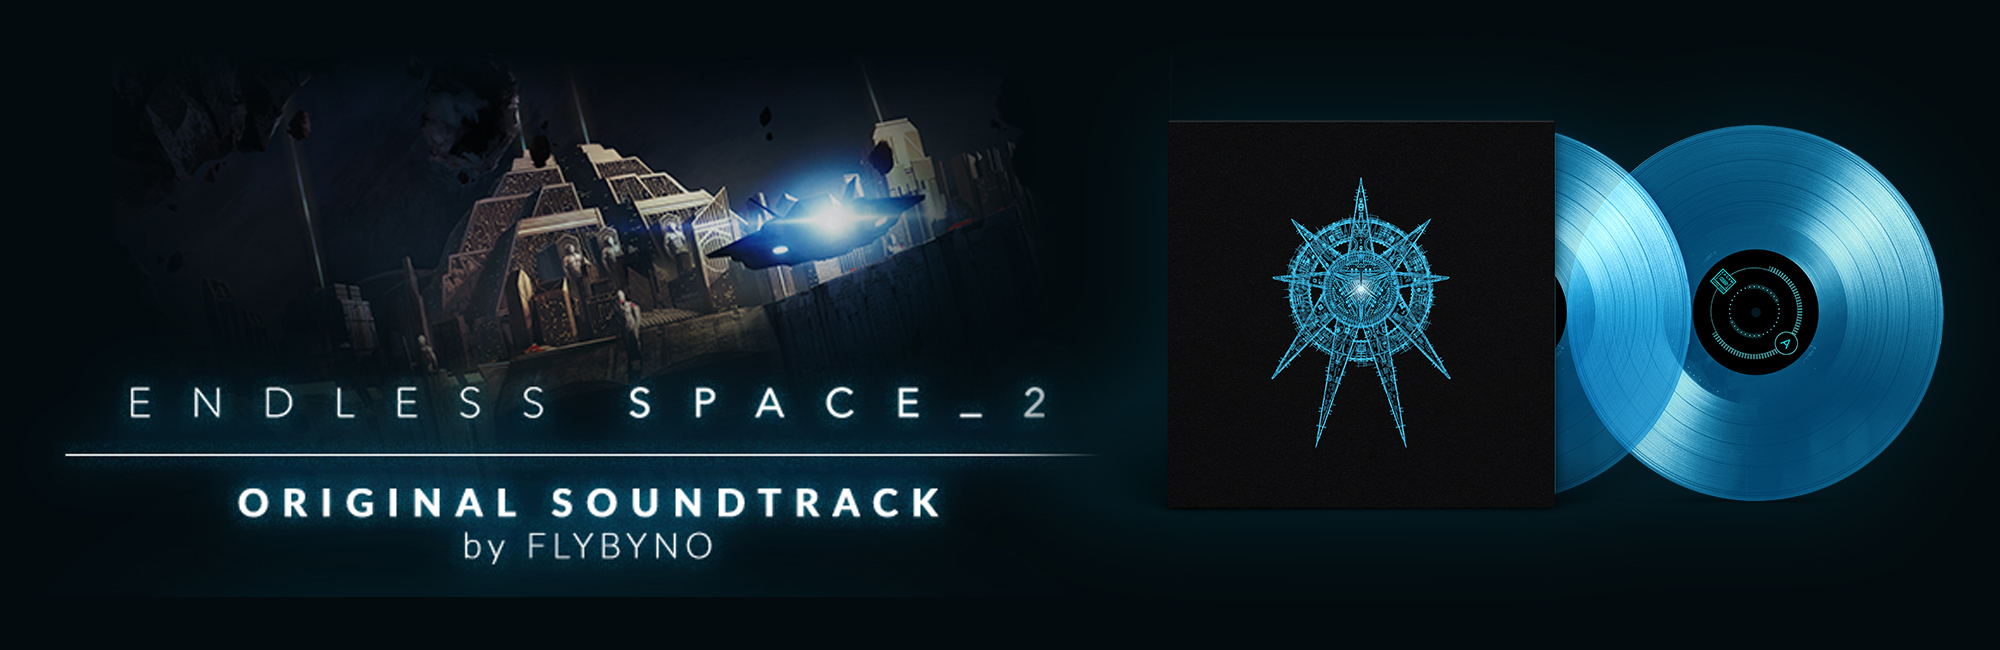 vinyl edition of Endless Space 2